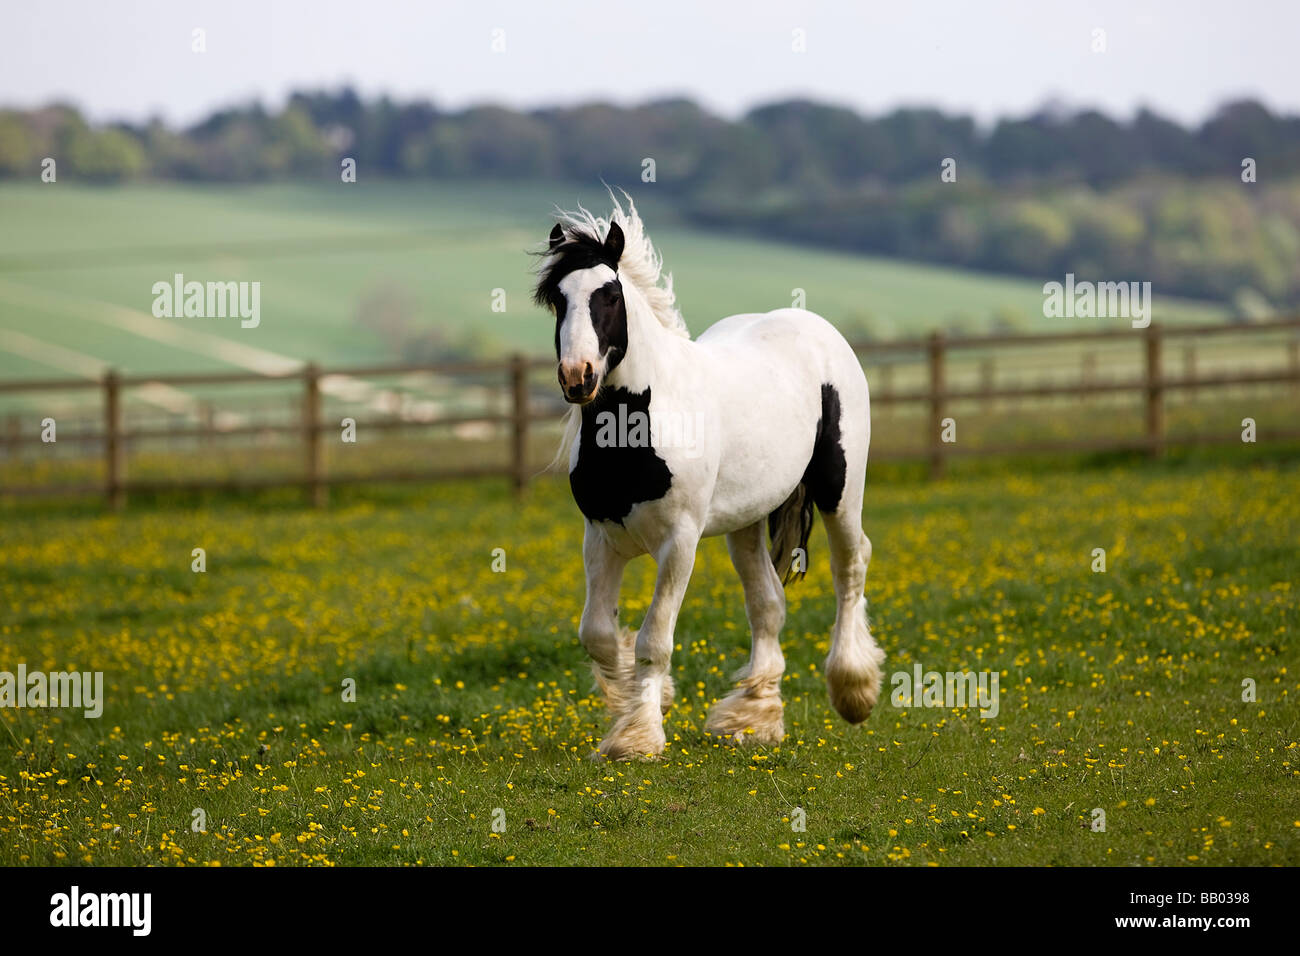 Horses rescued by the RSPCA at the Rest for Horses charity farm in Buckinghamshire, England running in a buttercup field Stock Photo